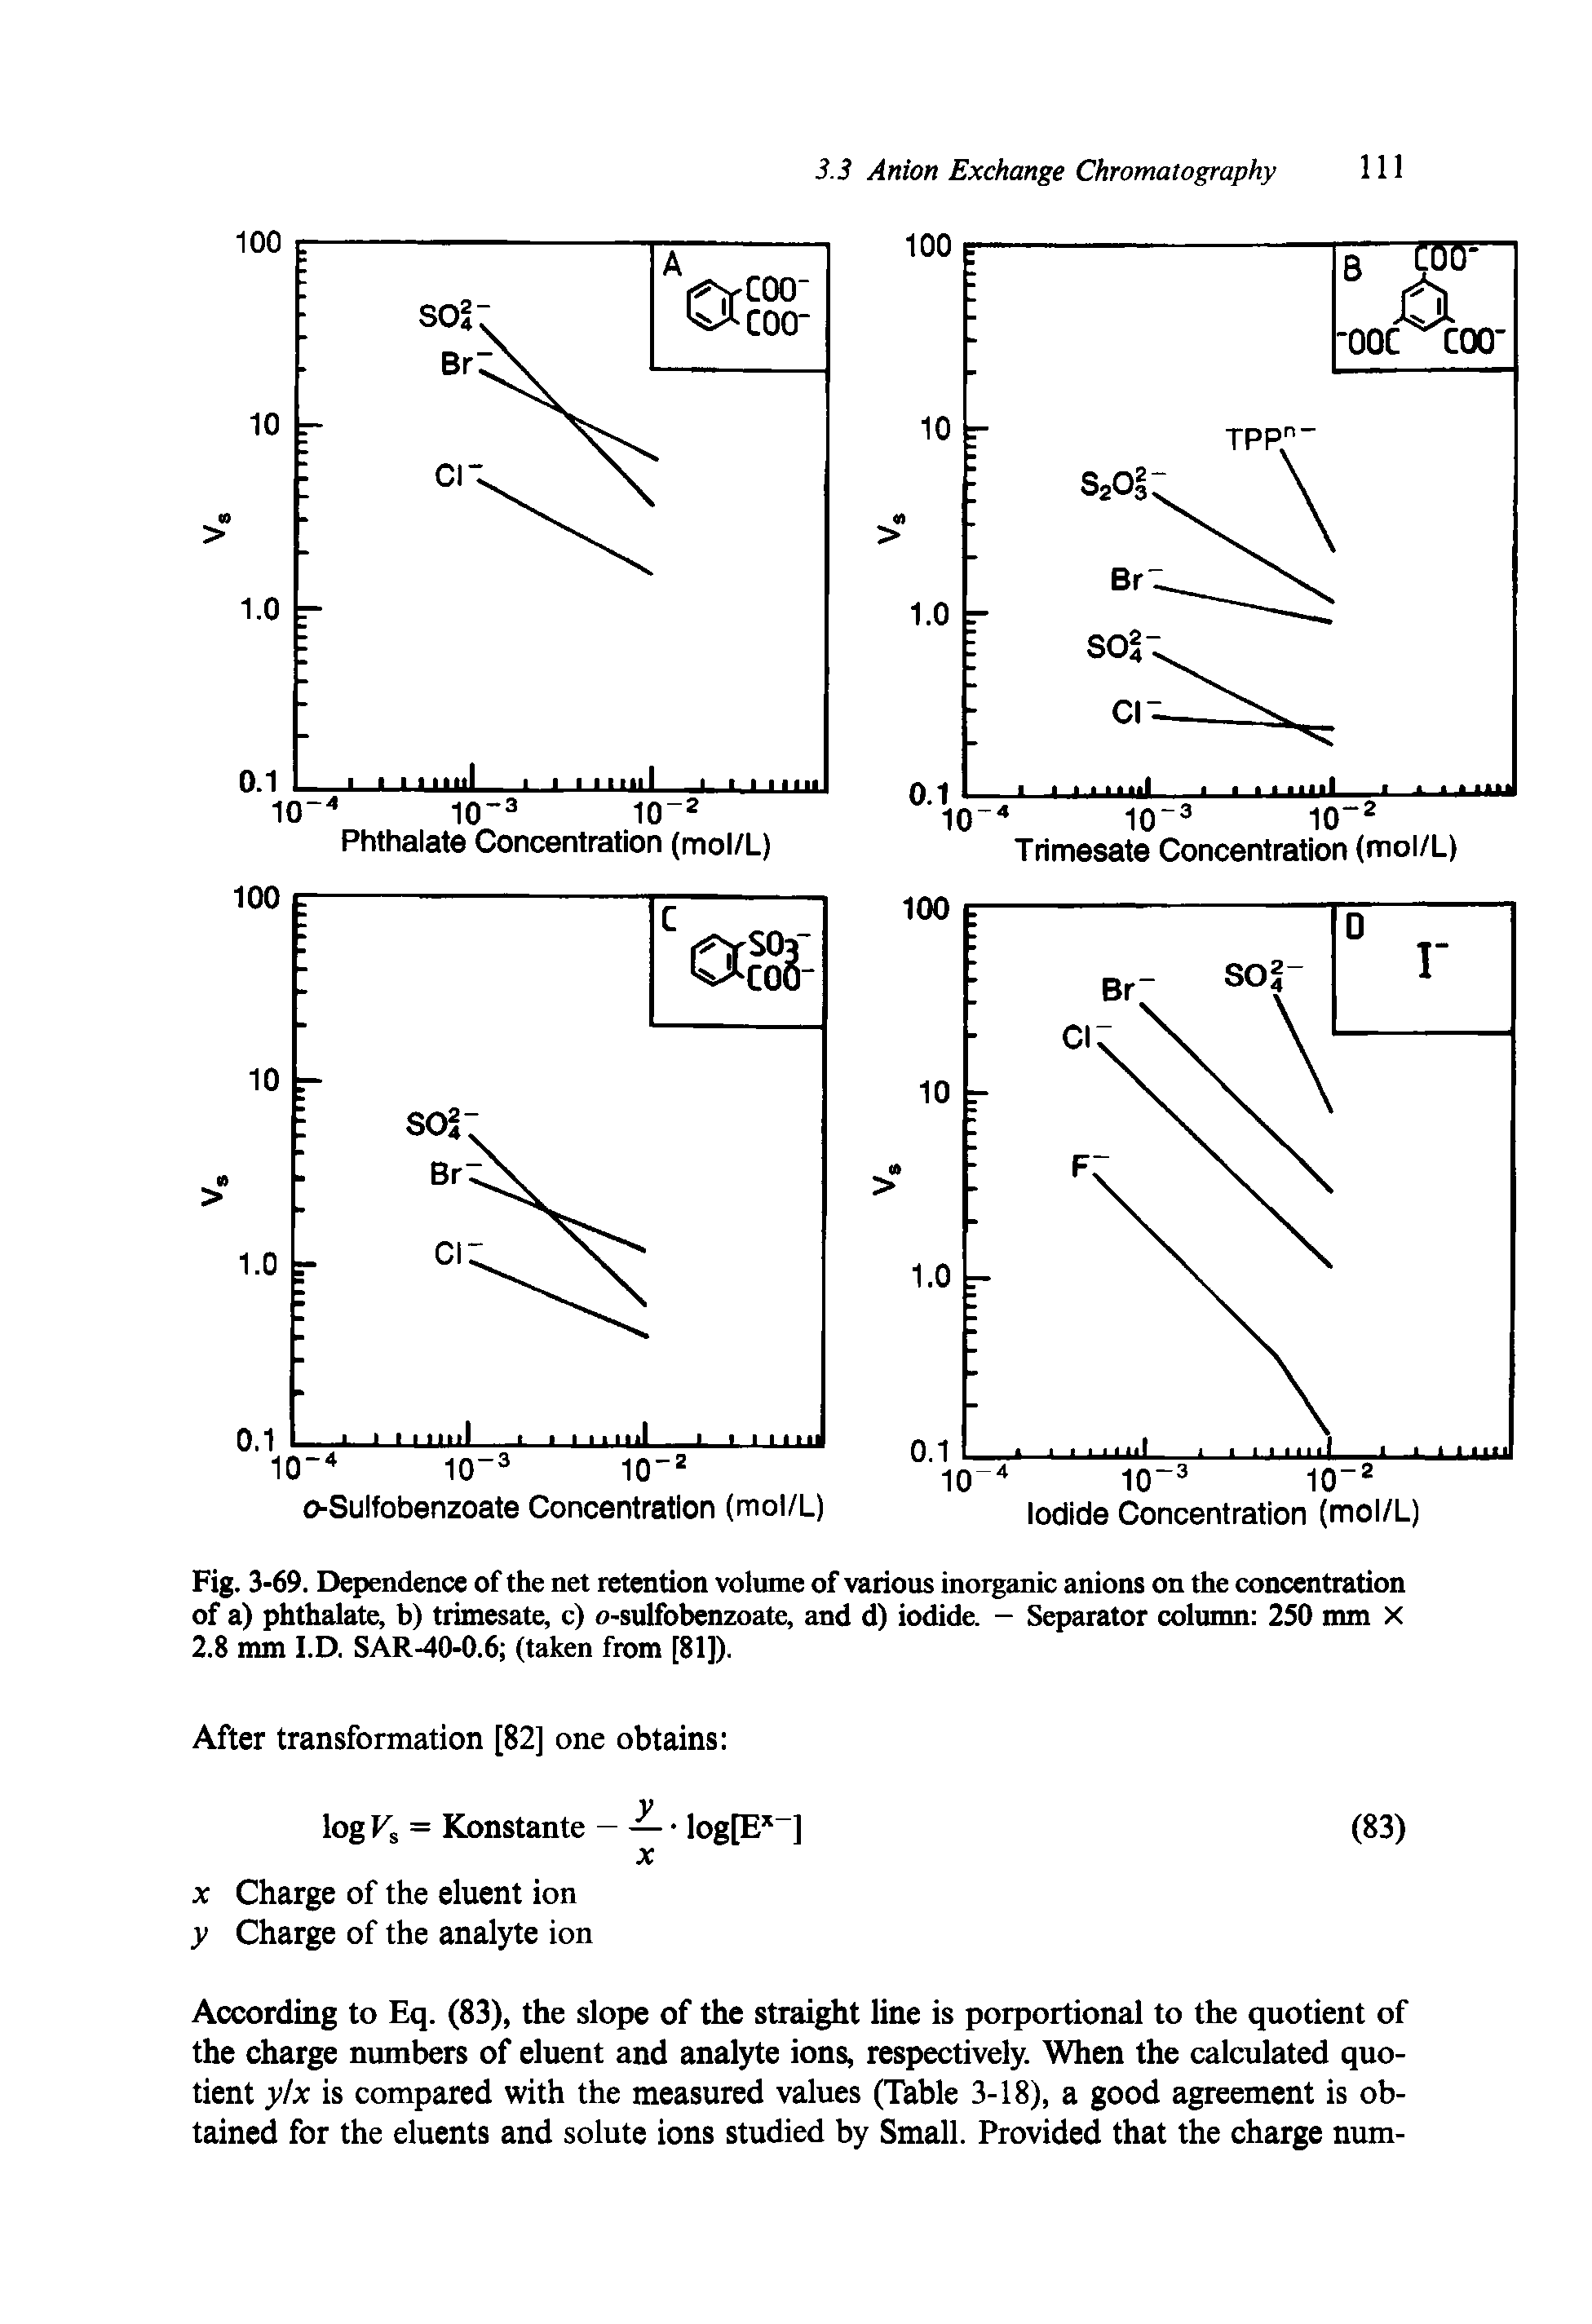 Fig. 3-69. Dependence of the net retention volume of various inorganic anions on the concentration of a) phthalate, b) trimesate, c) o-sulfobenzoate, and d) iodide. - Separator column 250 mm X 2.8 mm I.D. SAR-40-0.6 (taken from [81]).